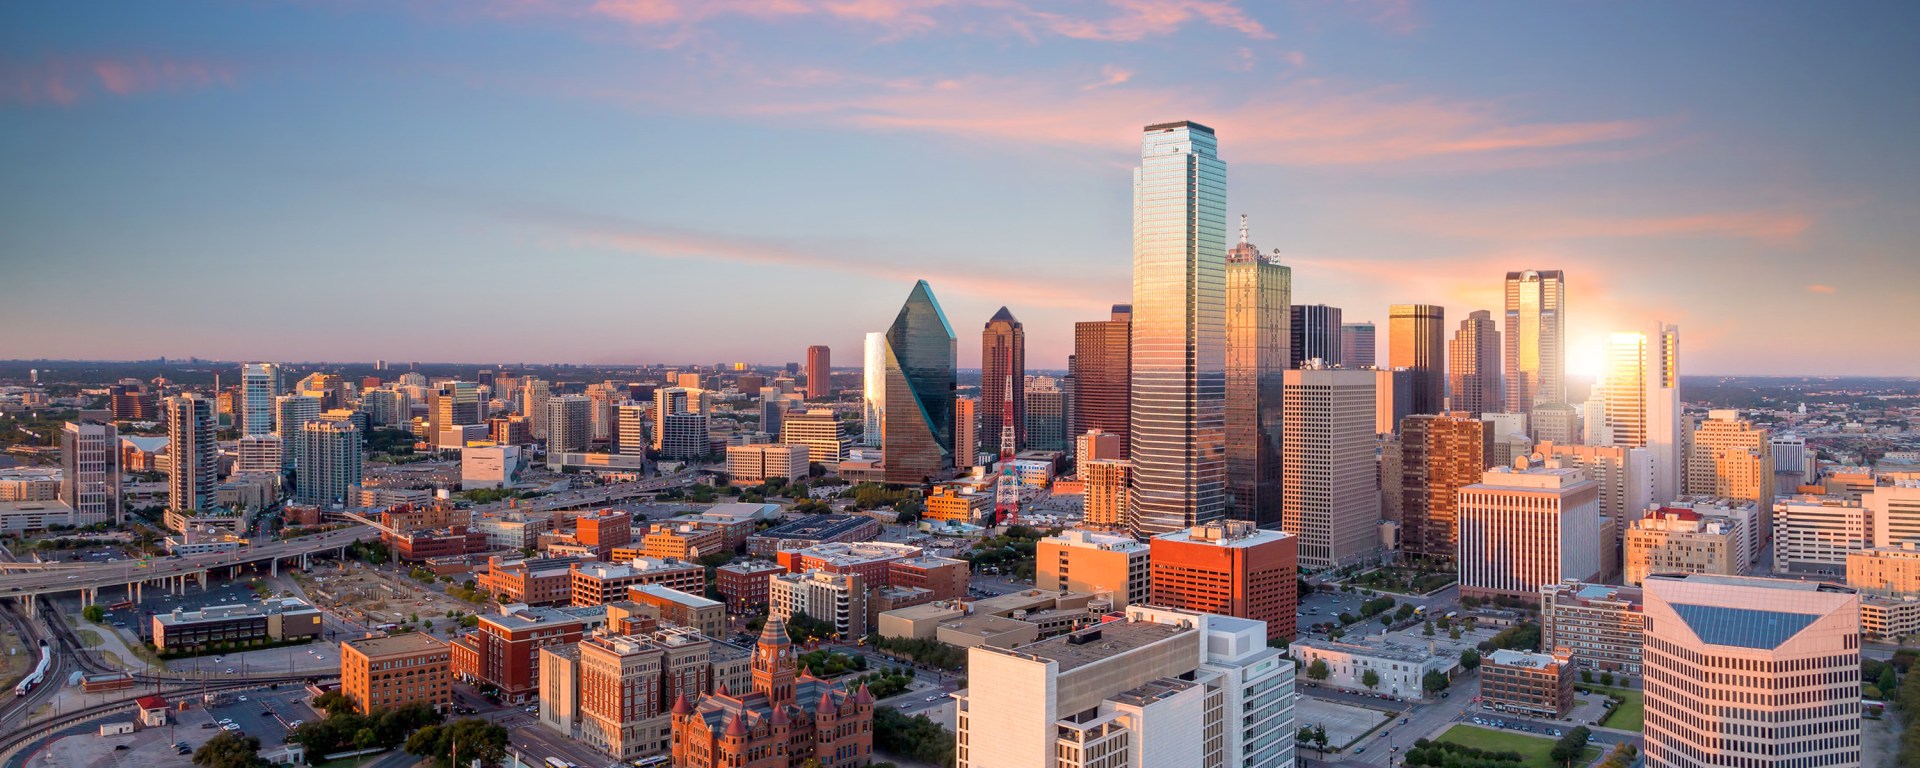 DataBank to Expand Flagship DFW3 Data Center in Dallas